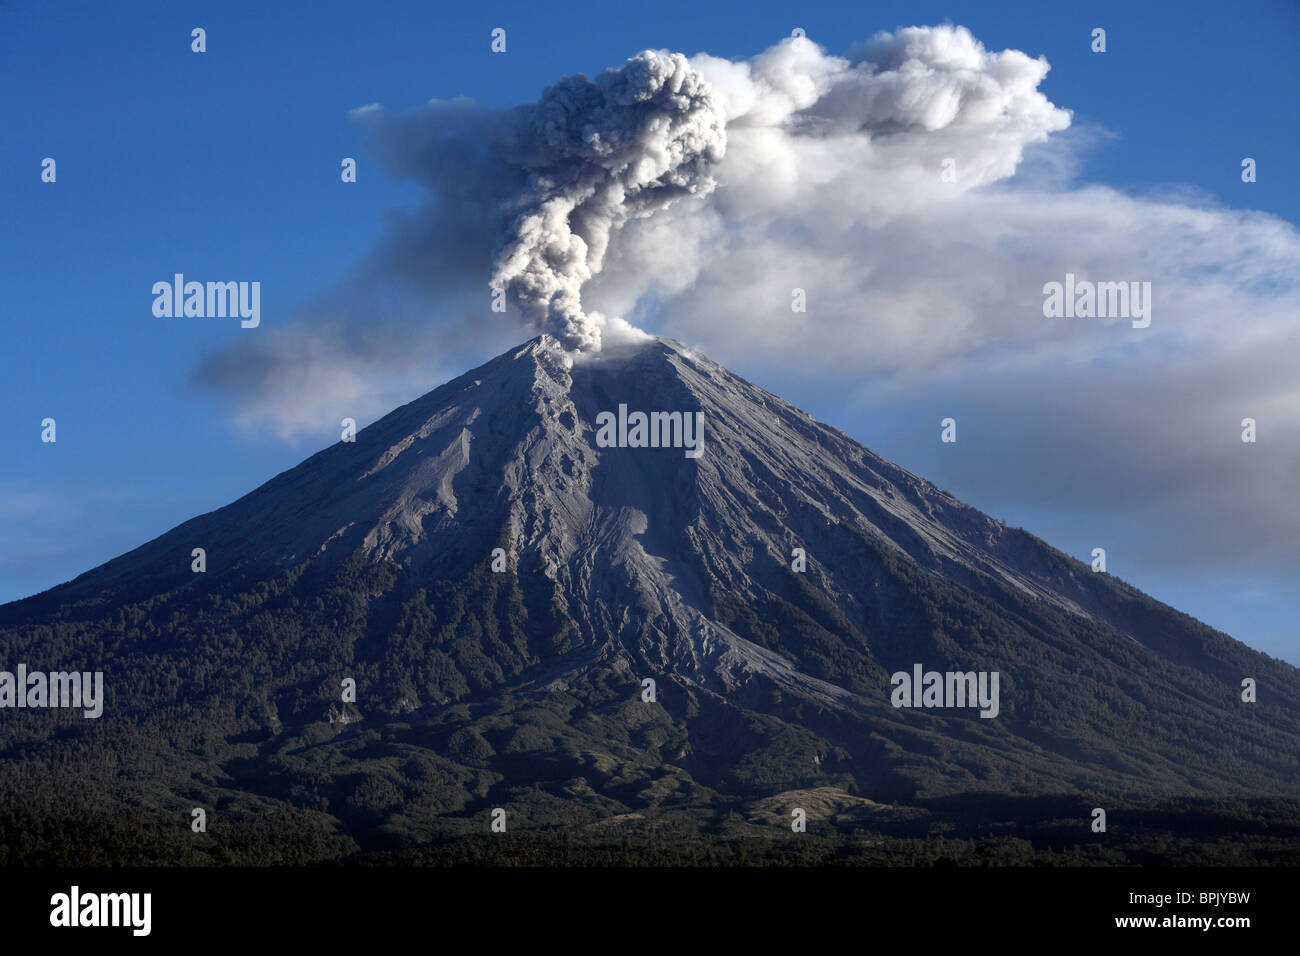 composite volcano pictures only